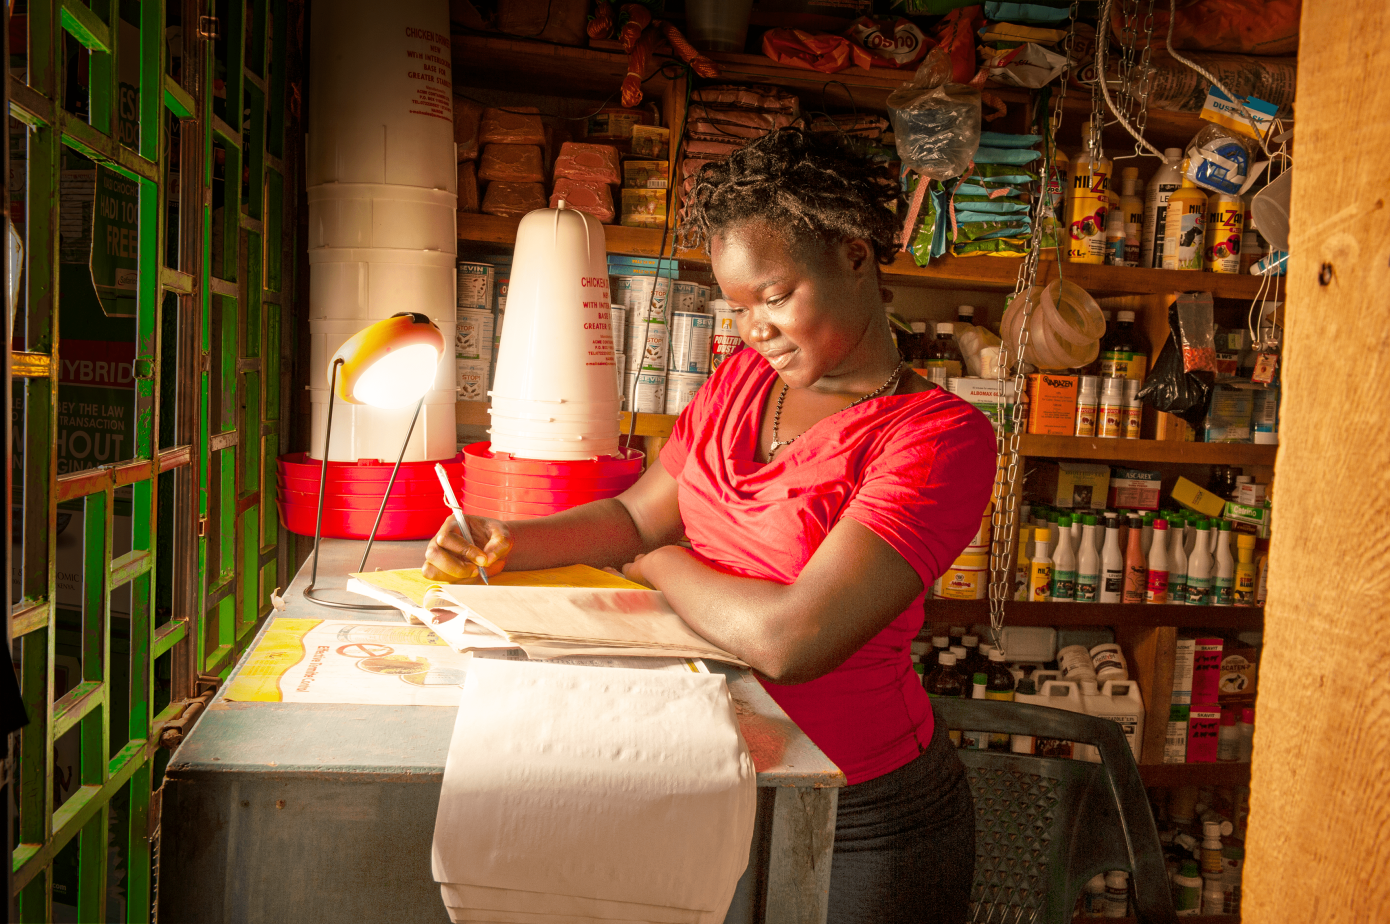 Sun King raises $260M to widen clean energy access in Africa Asia